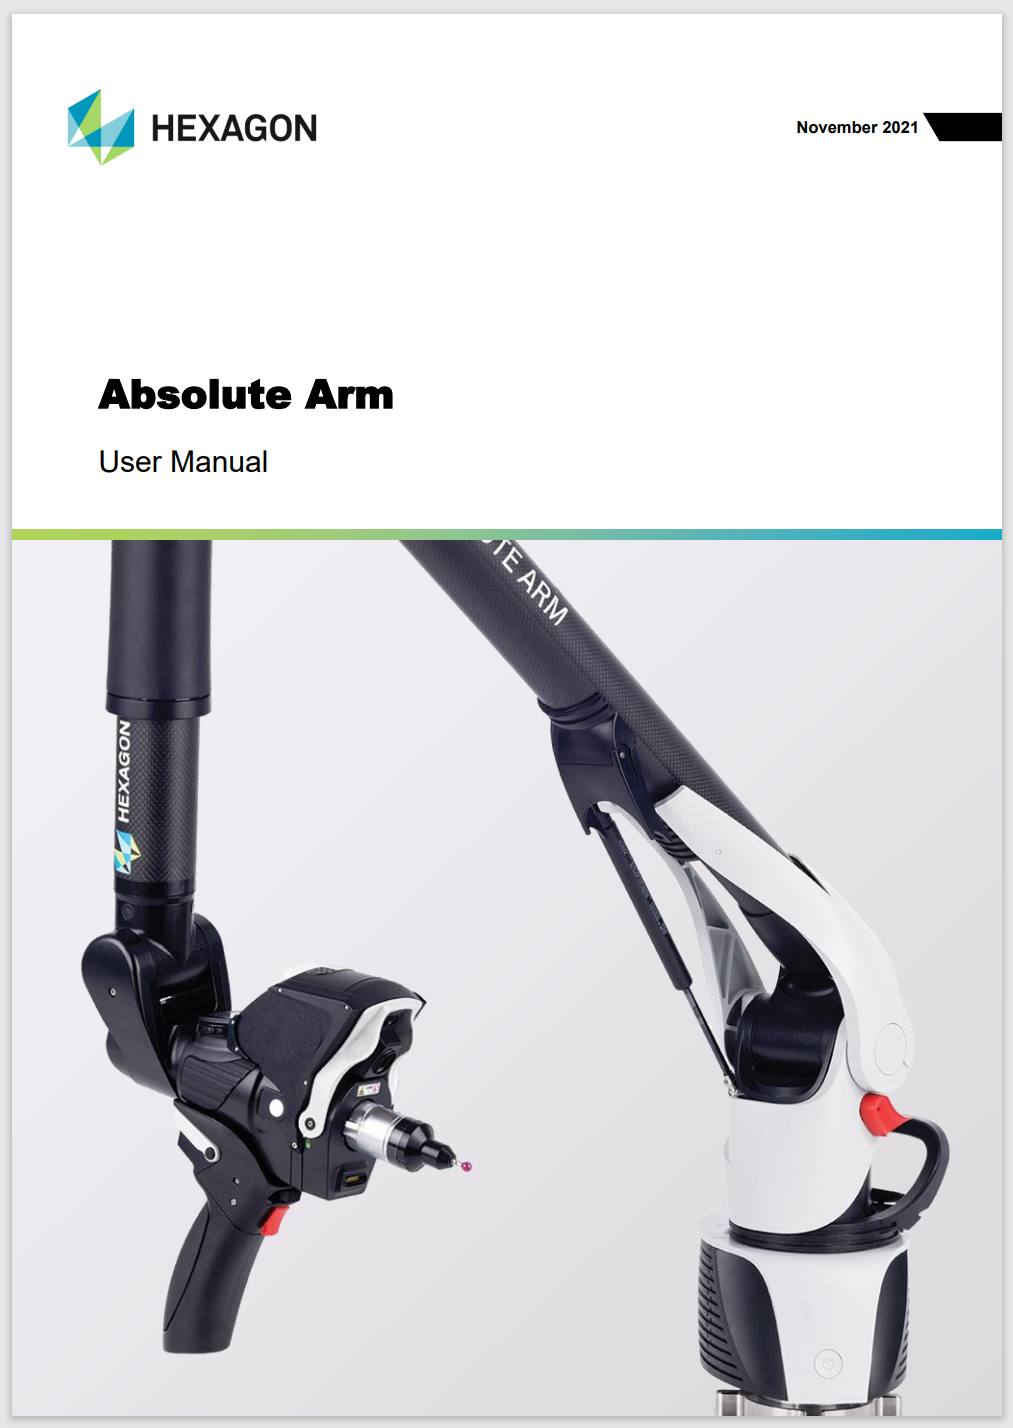 Where can I find the User Manual for my Hexagon Romer Absolute Arm?